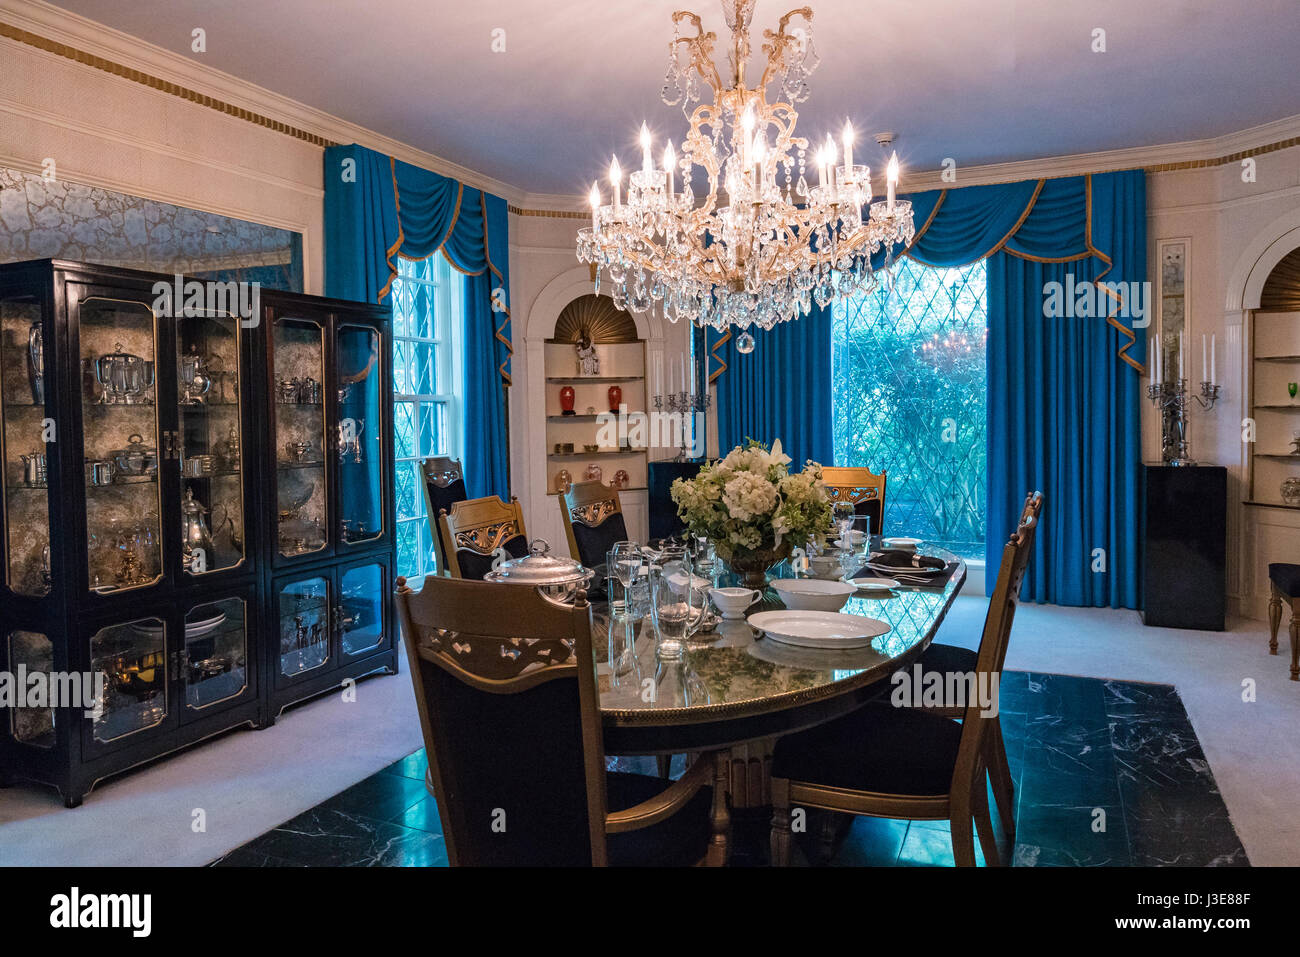 The dining room at Elvis Presley's house Graceland in Memphis, Tennessee Stock Photo